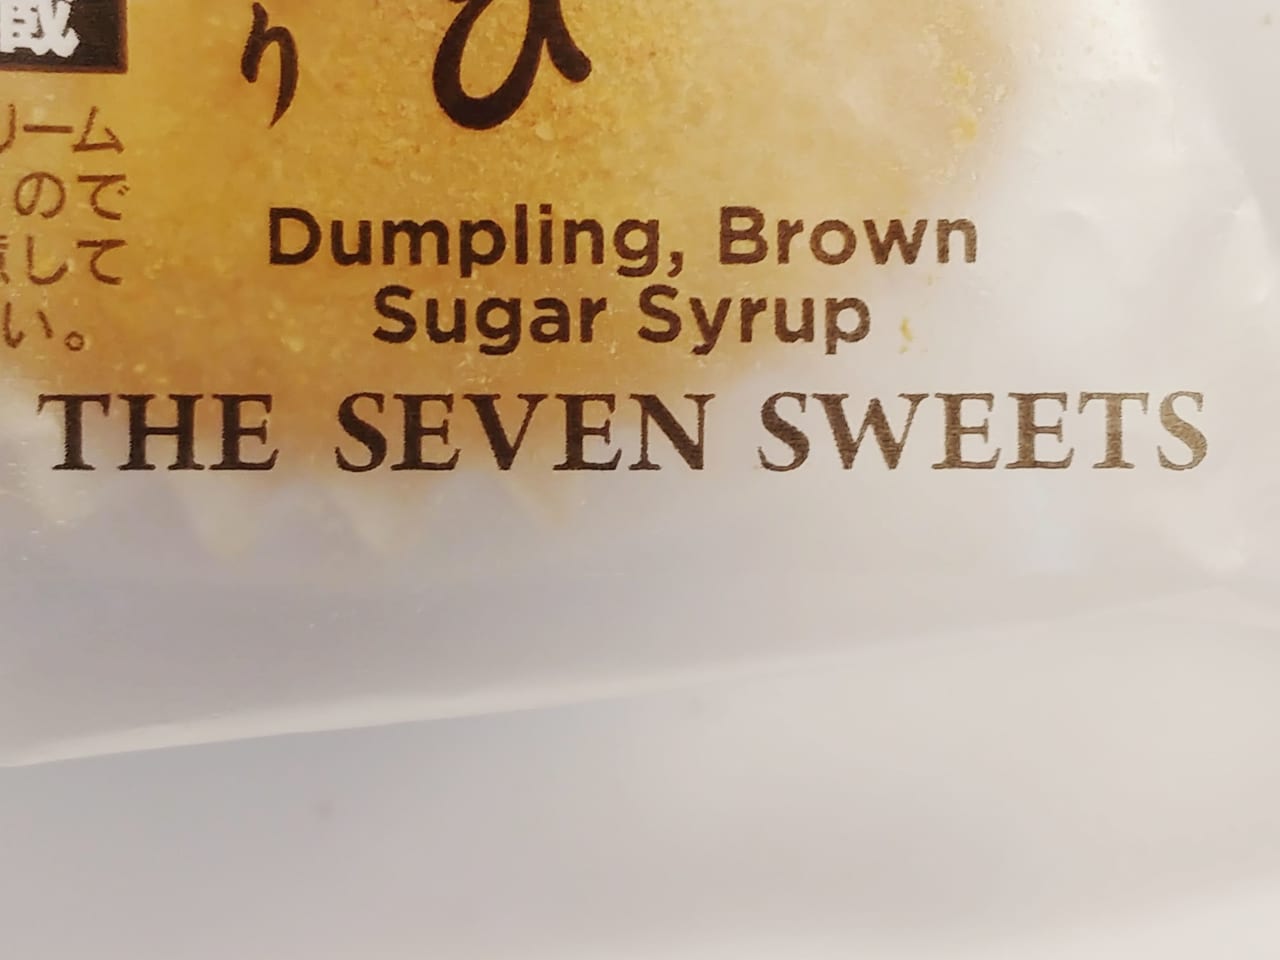 THE SEVEN SWEETS